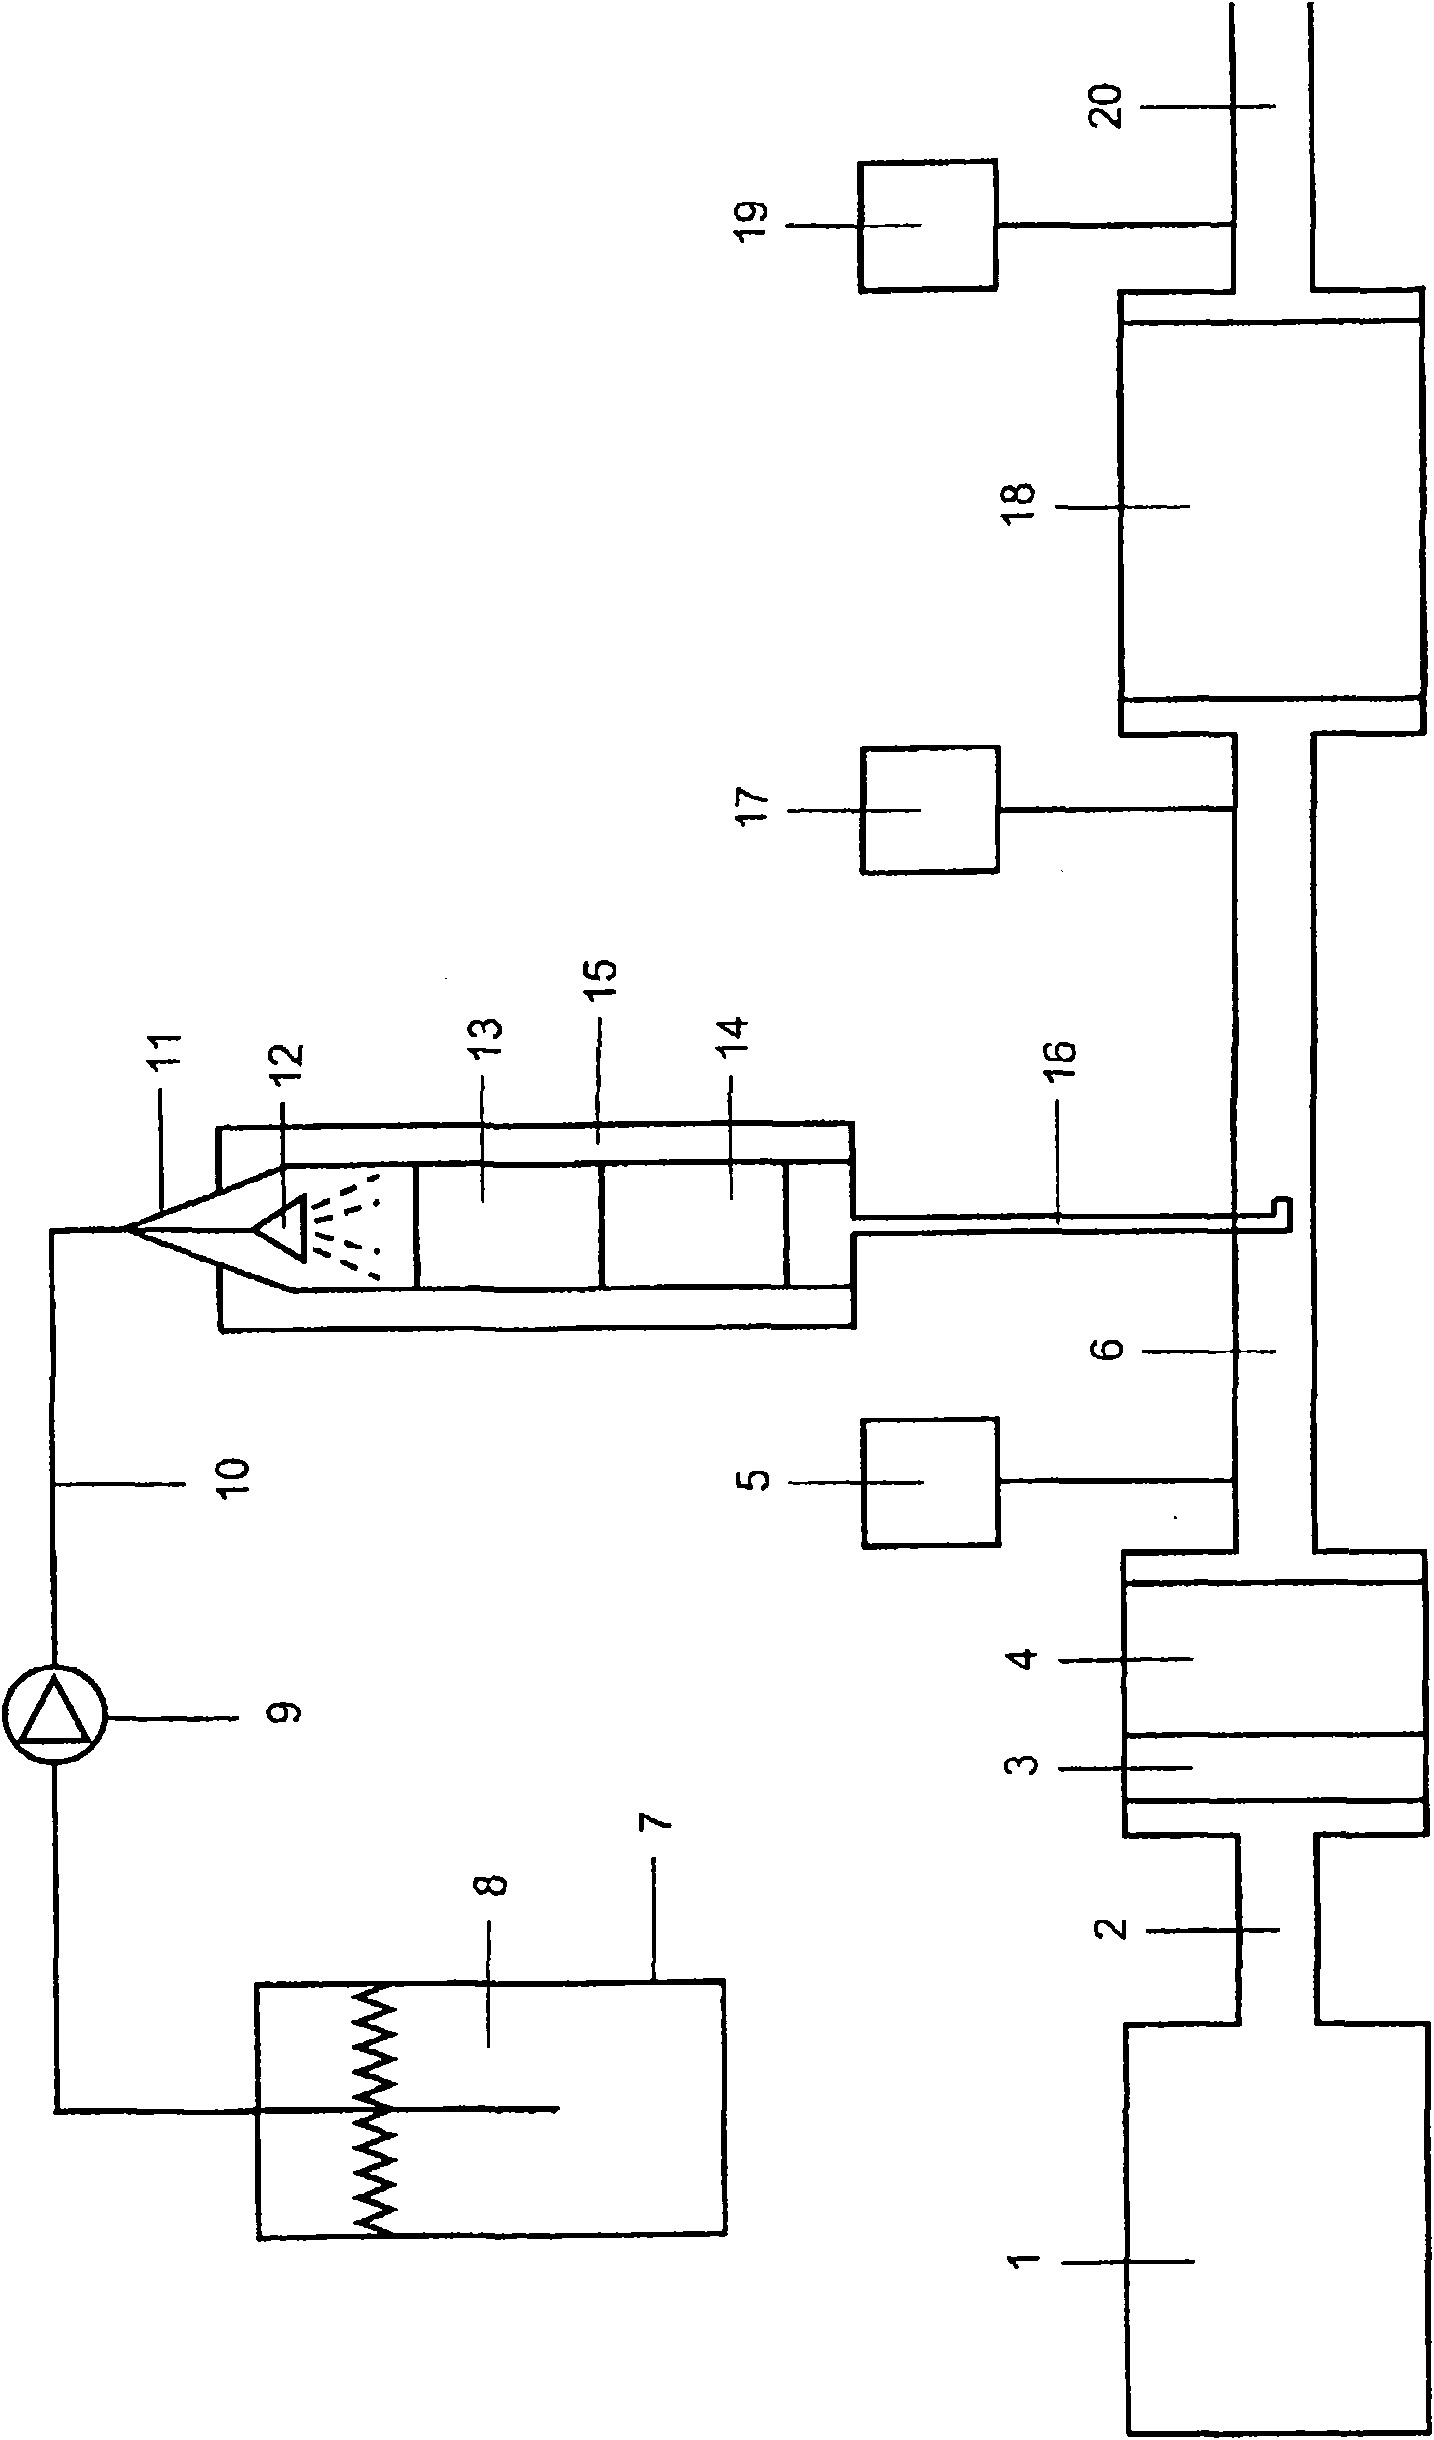 Method for the selective catalytic reduction of nitrogen oxides in exhaust gases of vehicles